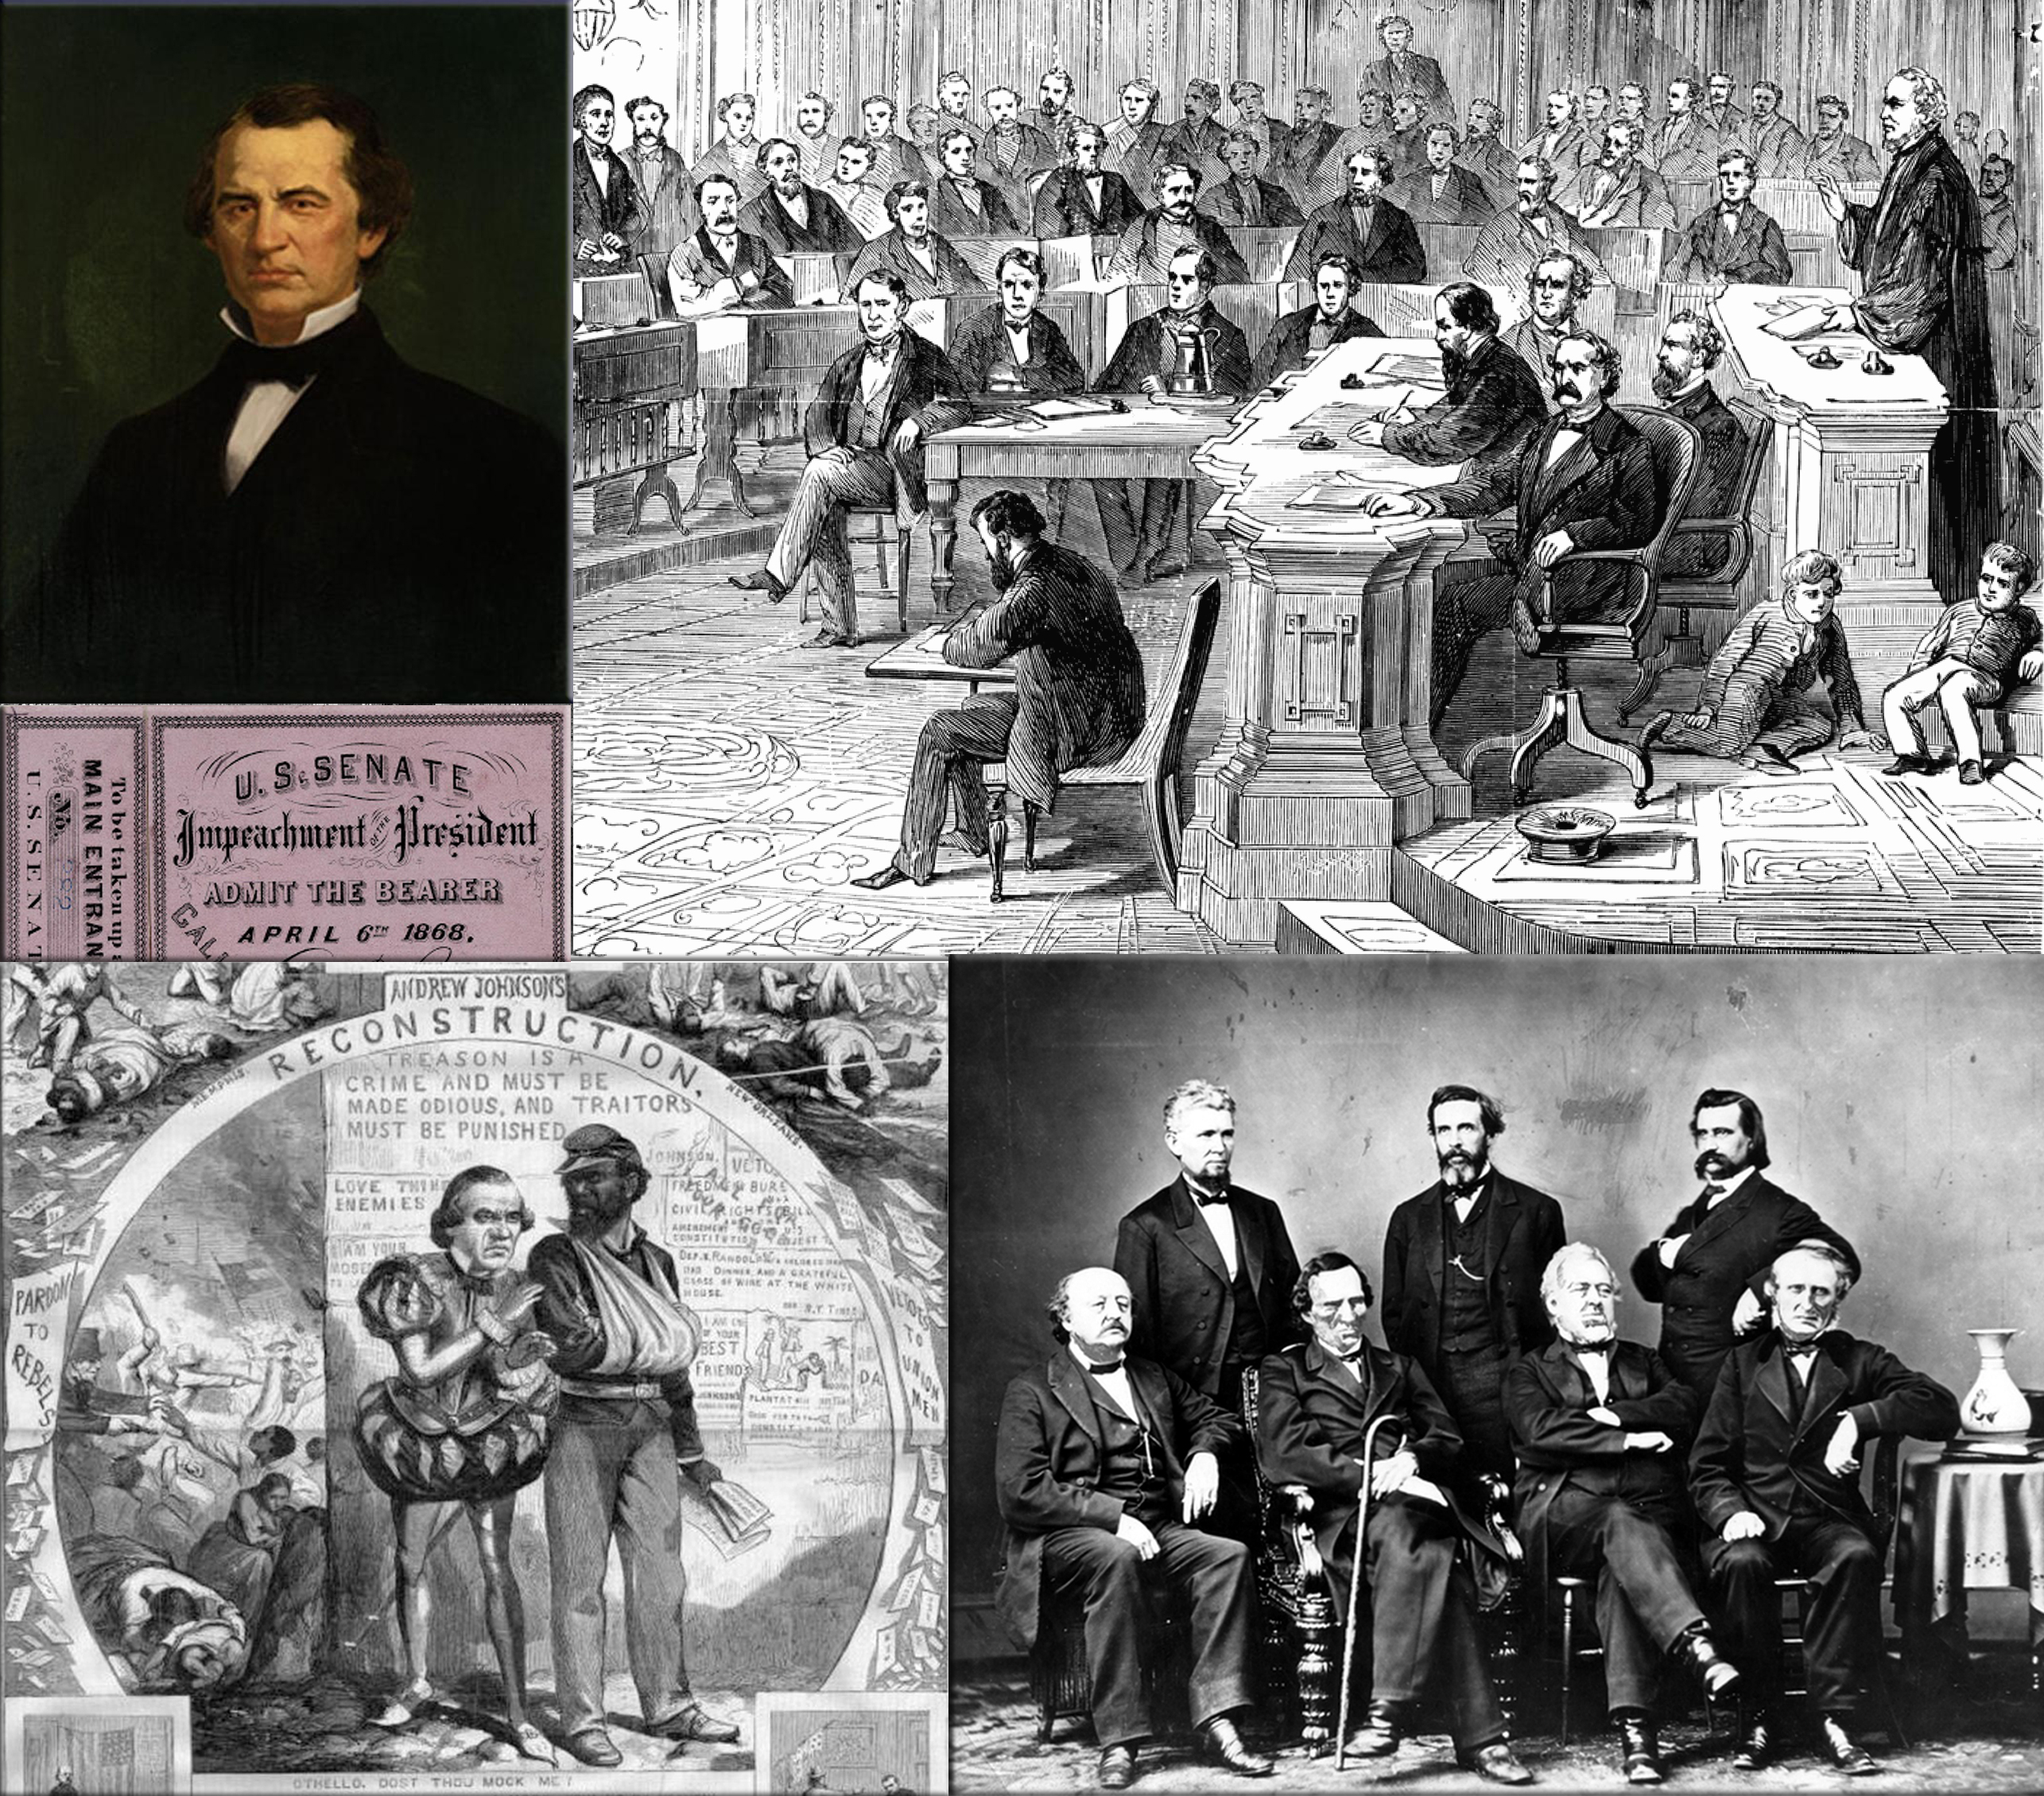 Andrew Johnson (December 29, 1808 – July 31, 1875), 17th President of the United States (1865–1869) (As Vice President of the United States in 1865, he succeeded Abraham Lincoln following his assassination)